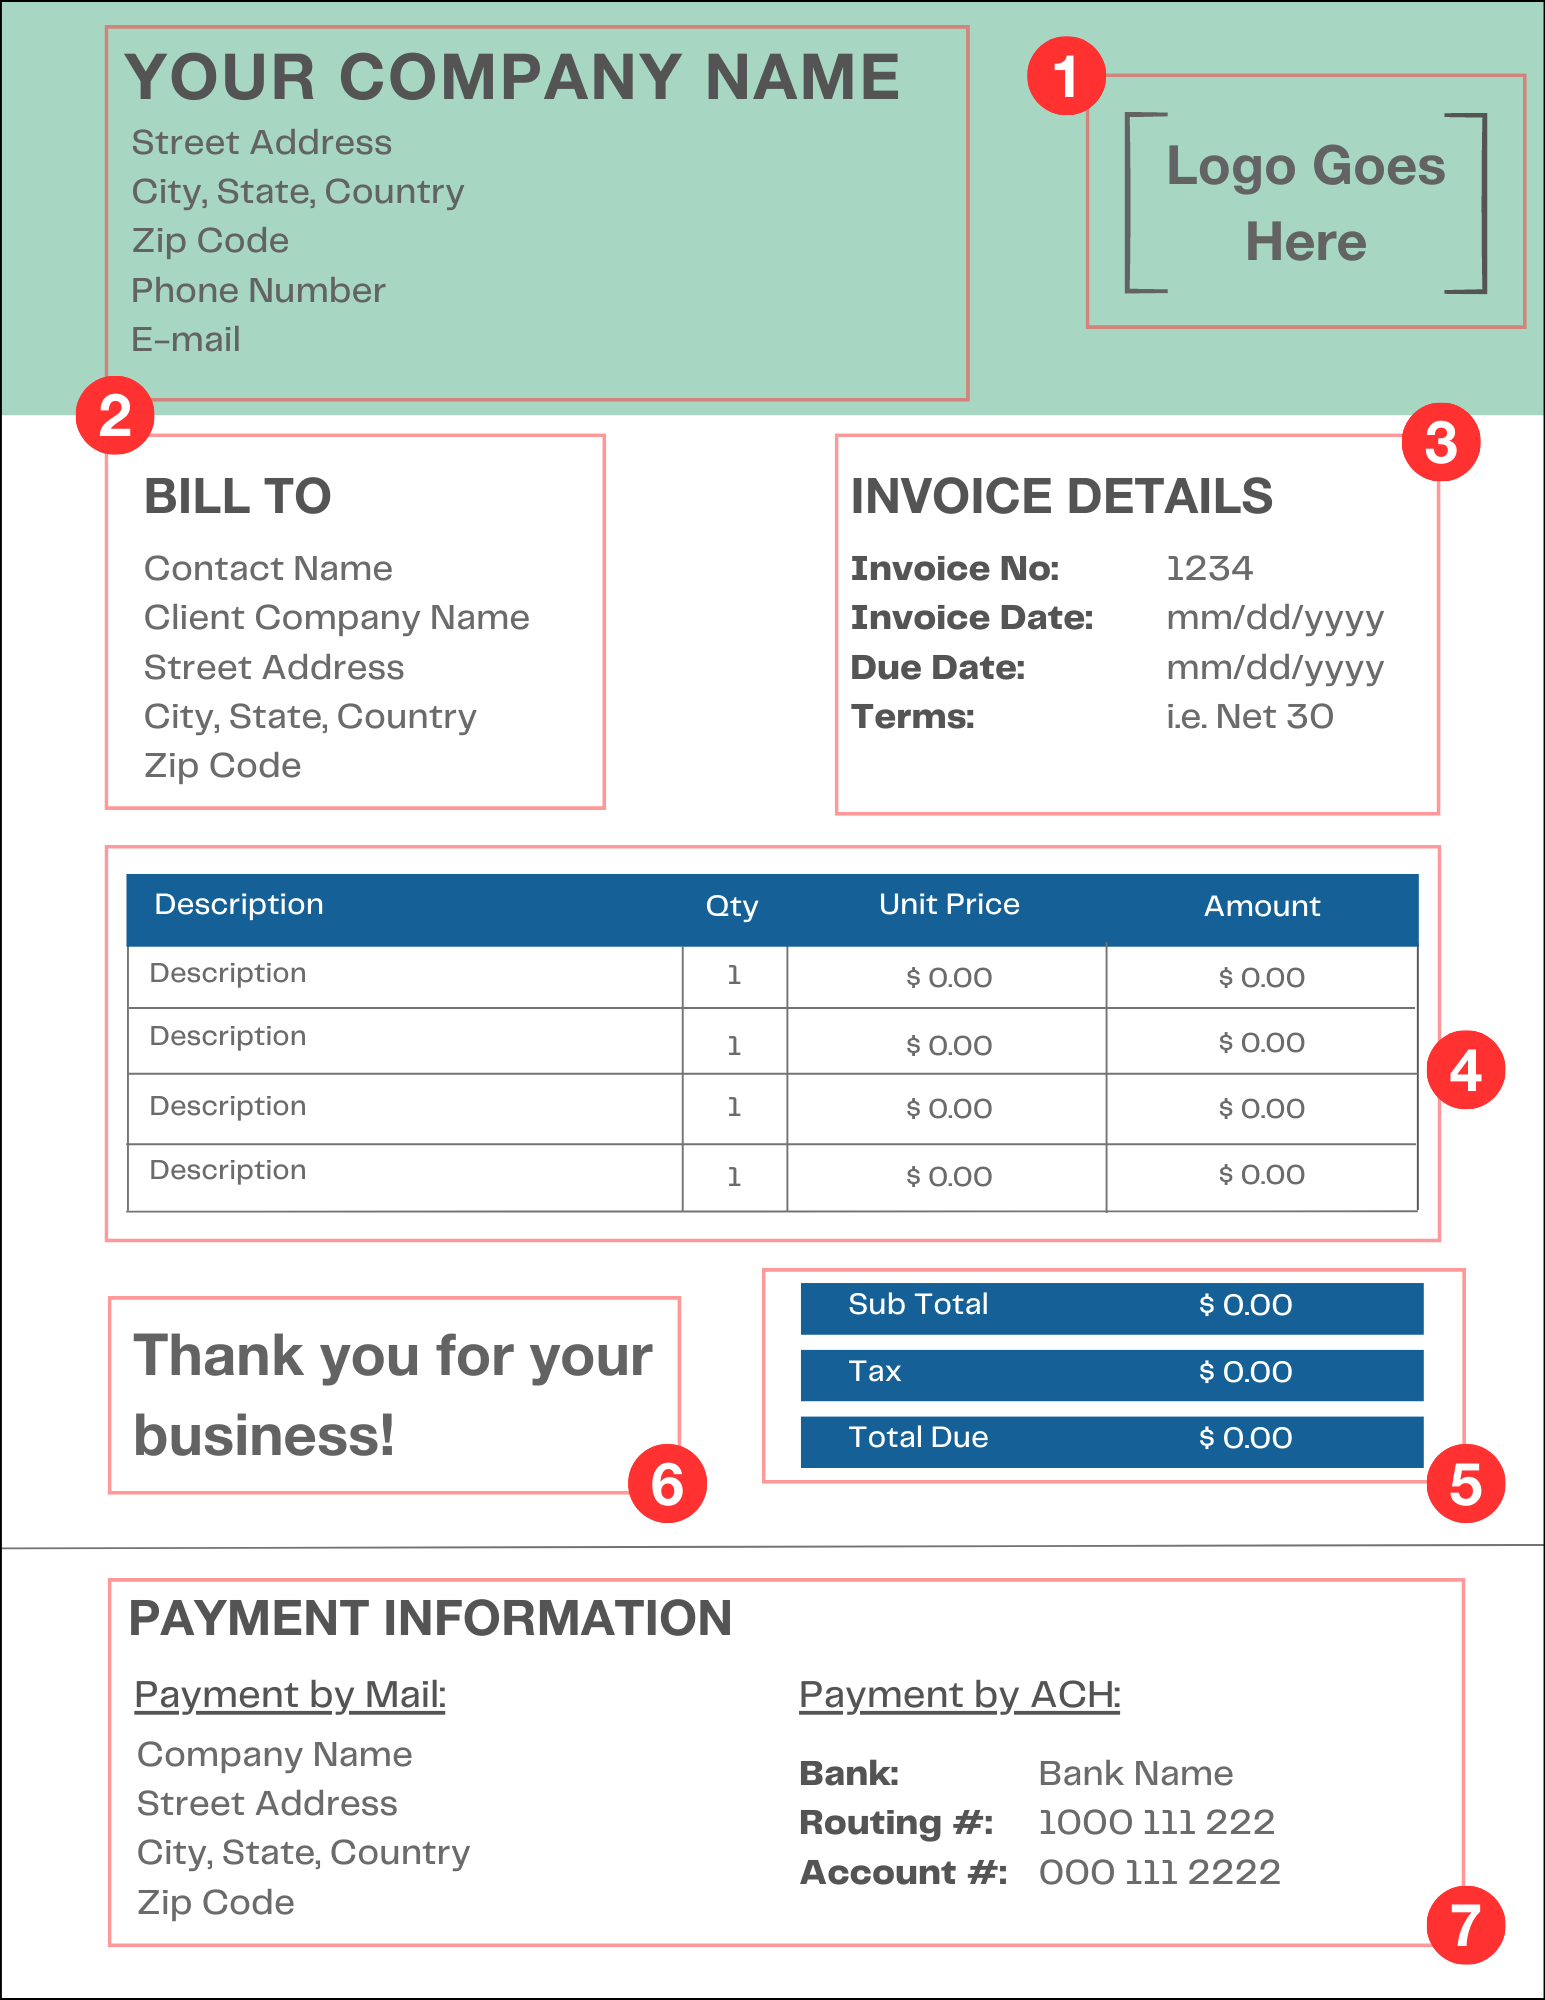 example invoice with guidance on how to create it